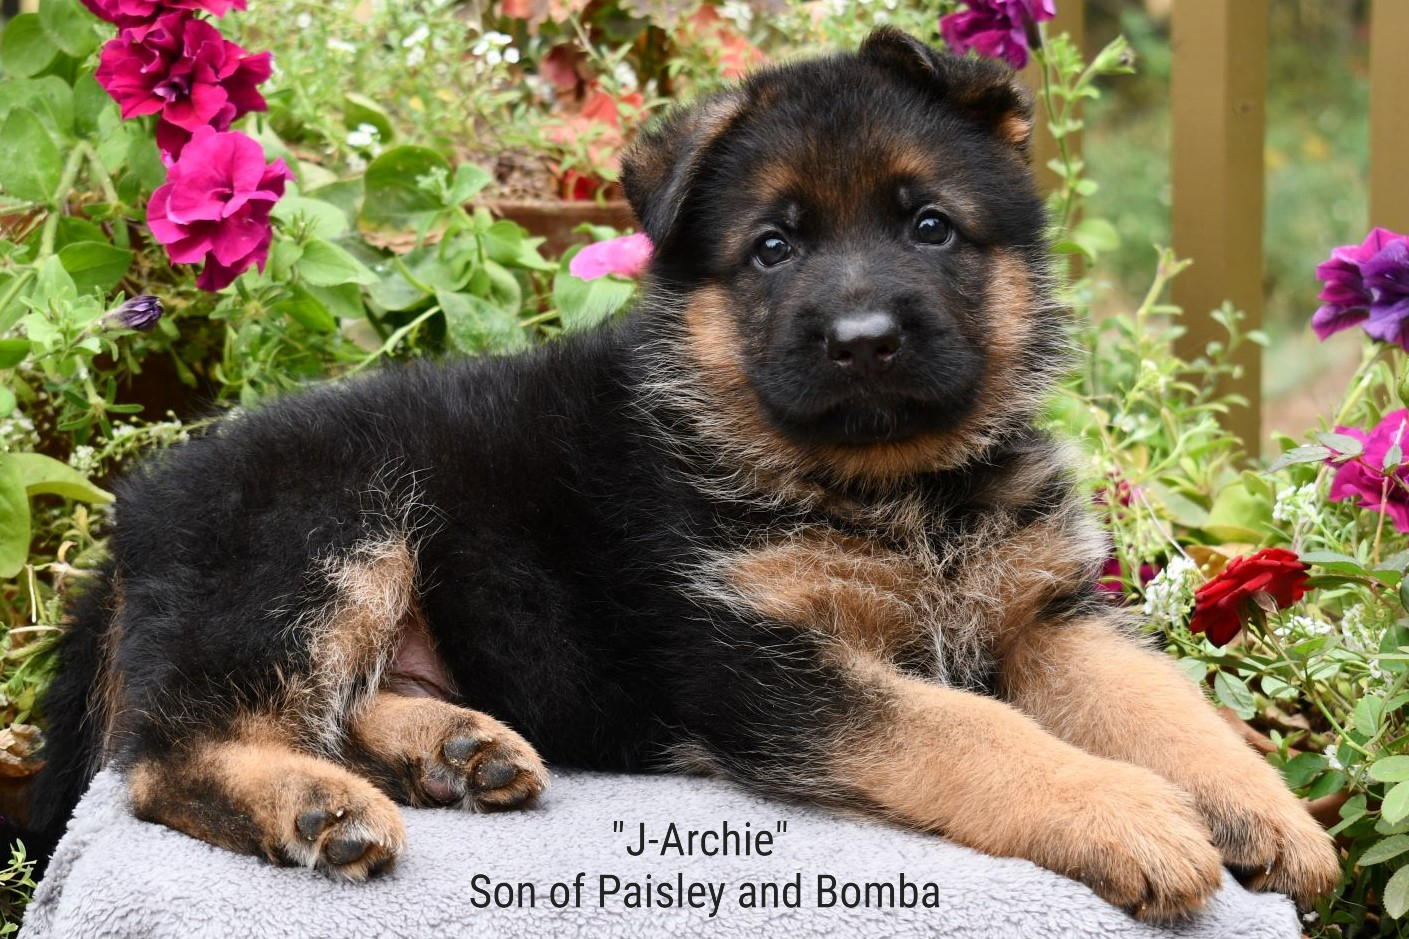 J-Archie Son of Paisley and Bomba